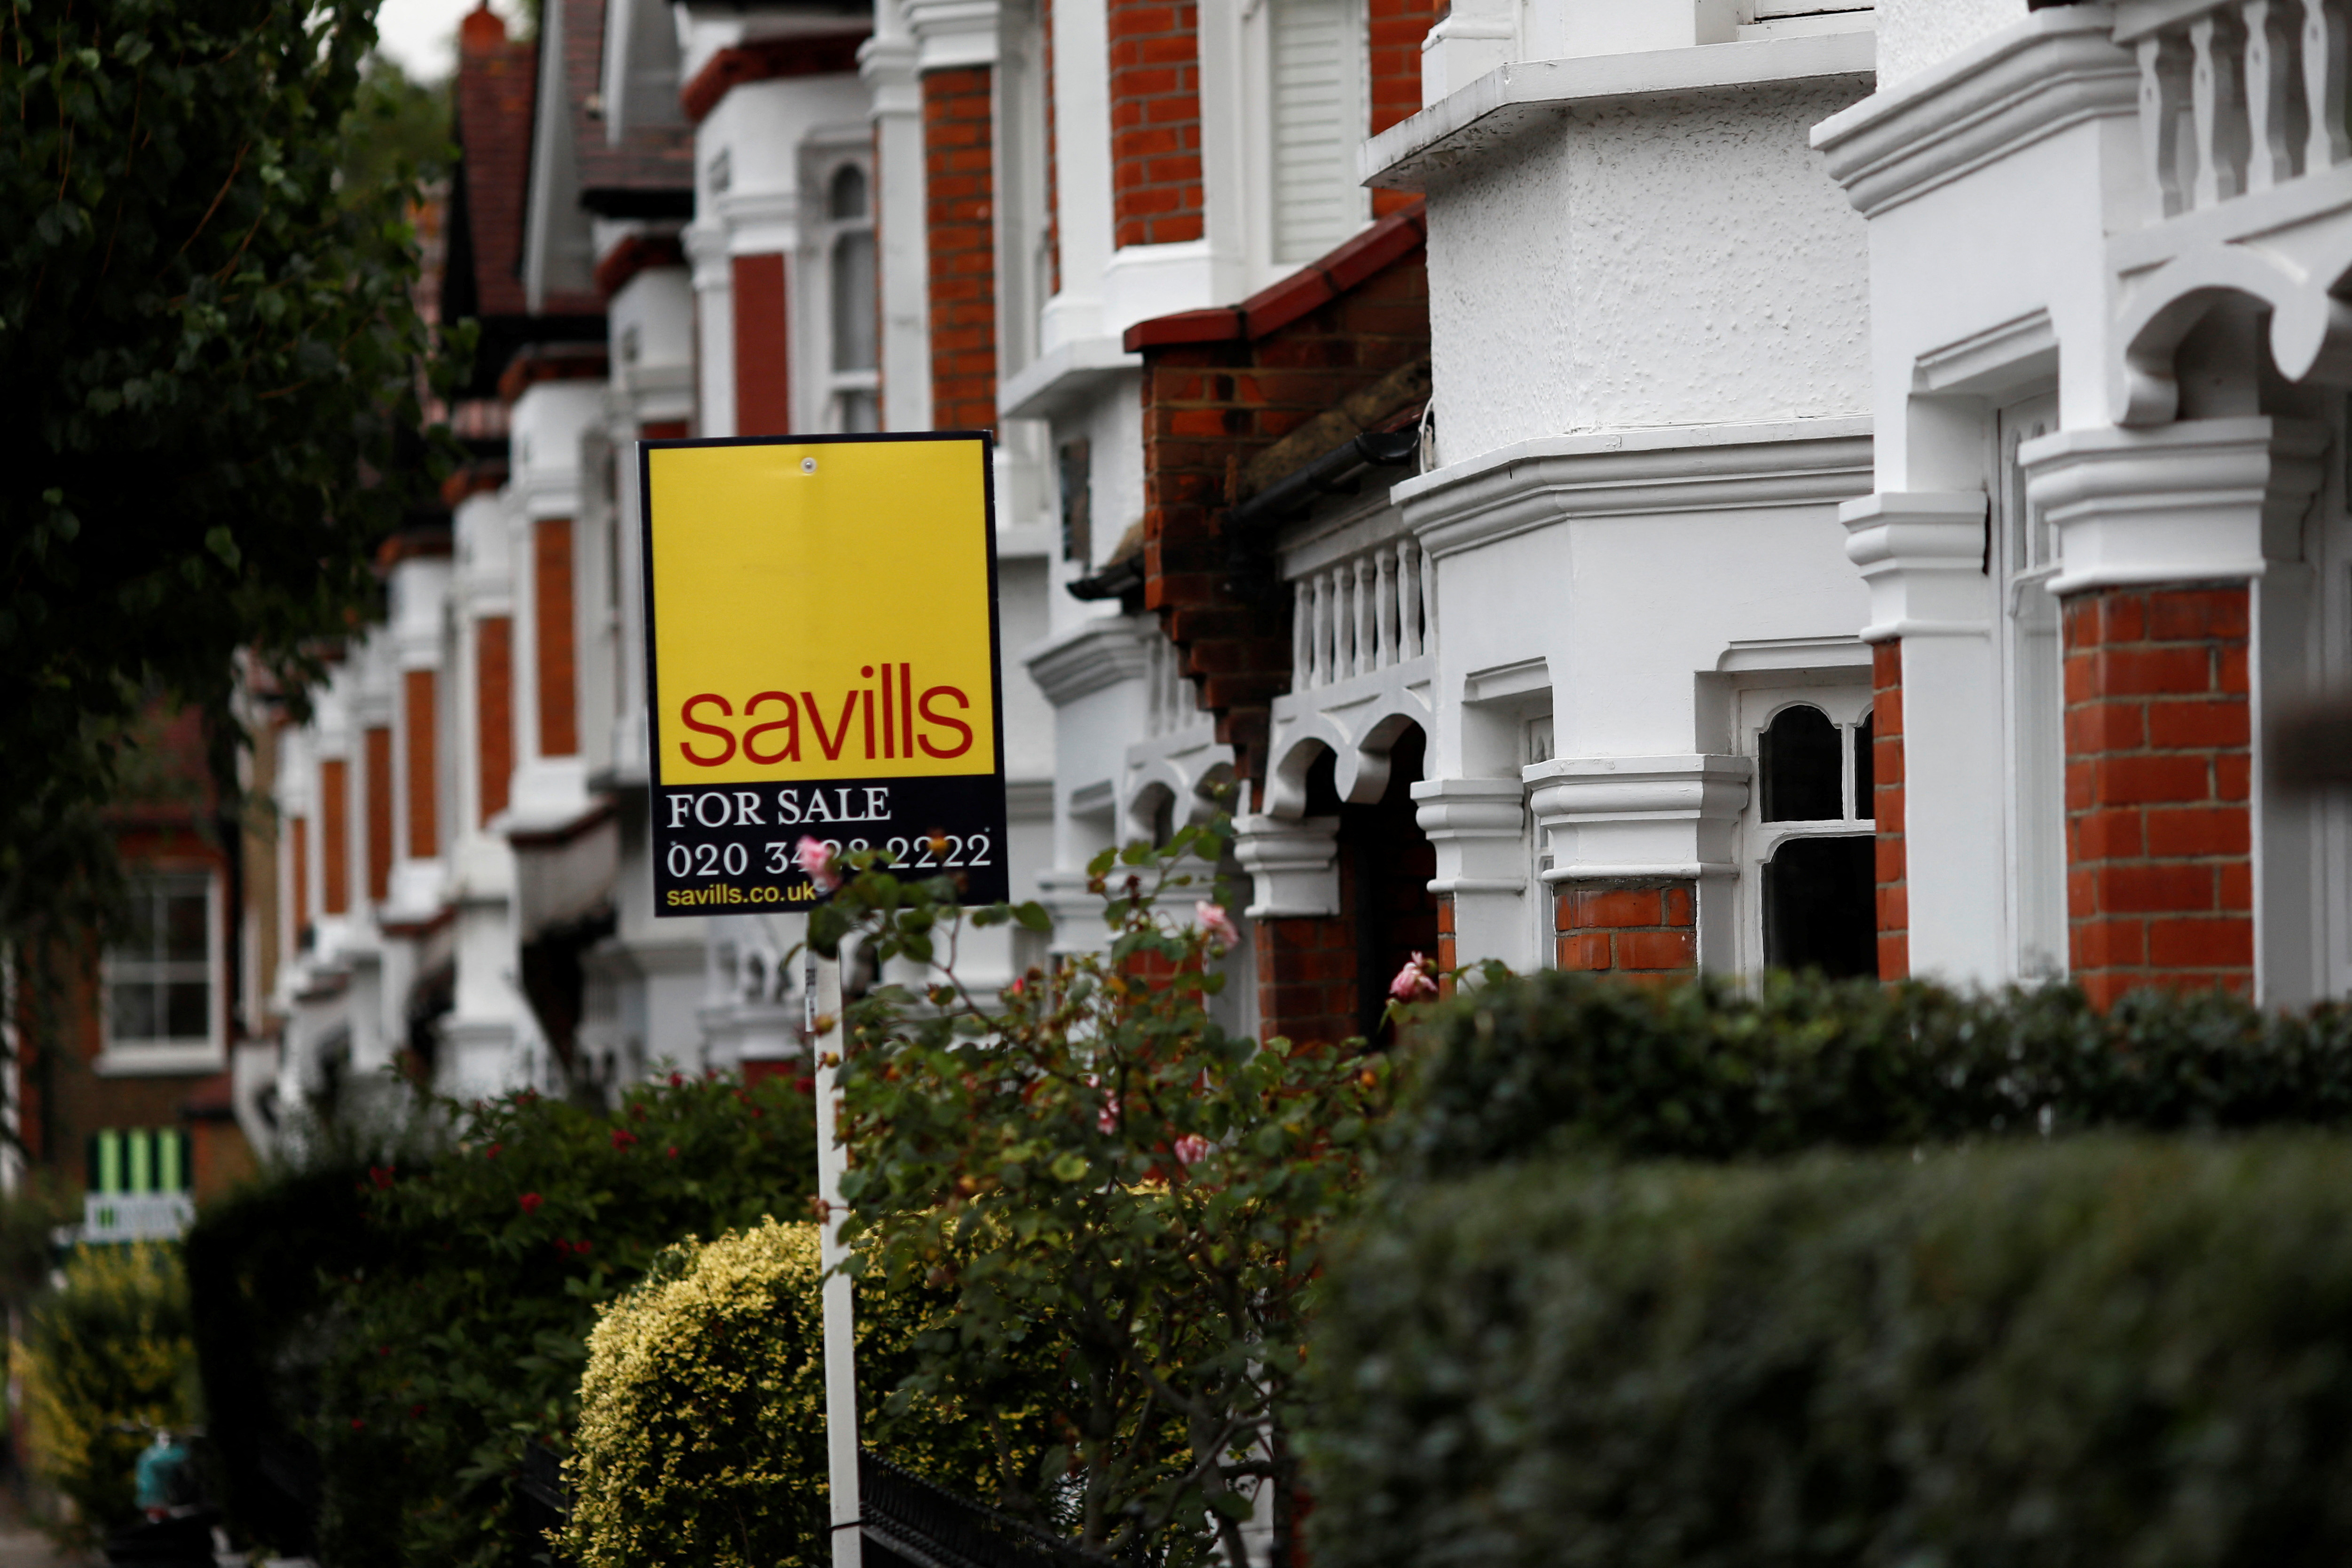 A Savills property estate agent sign is displayed outside a home in south London